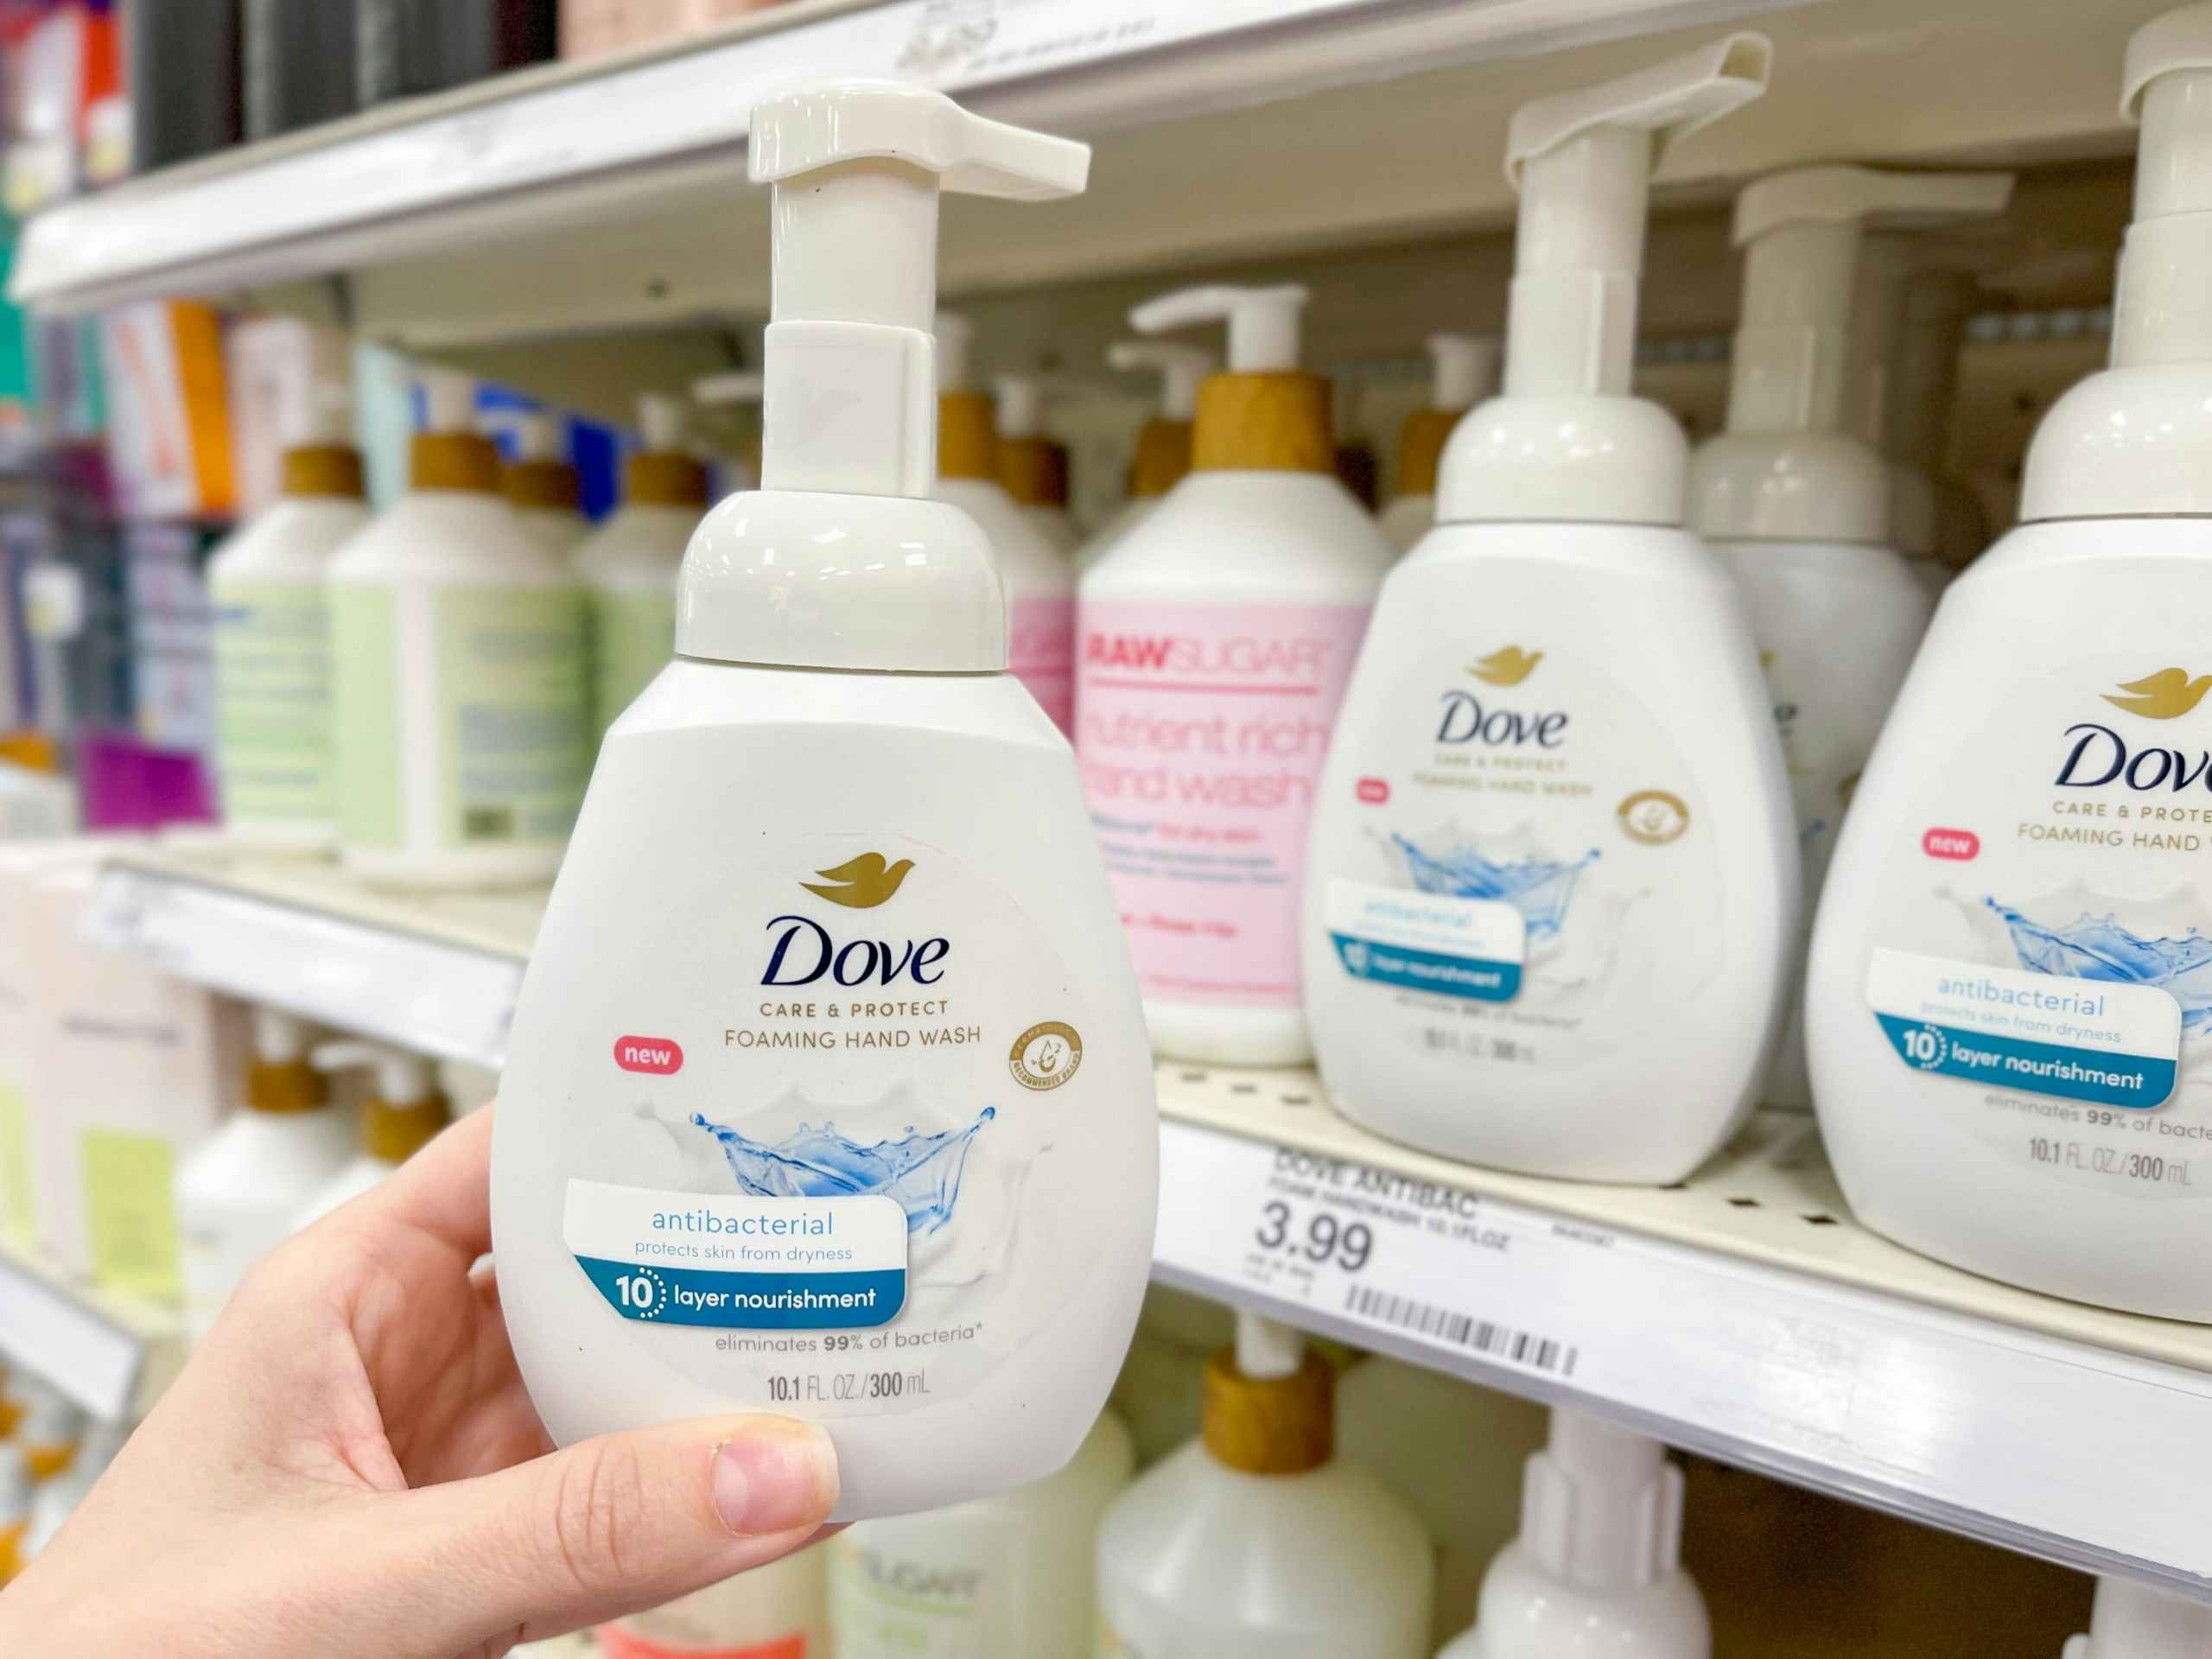 A Dove hand soap held out by hand next to other Dove hand soaps sitting on a store shelf.